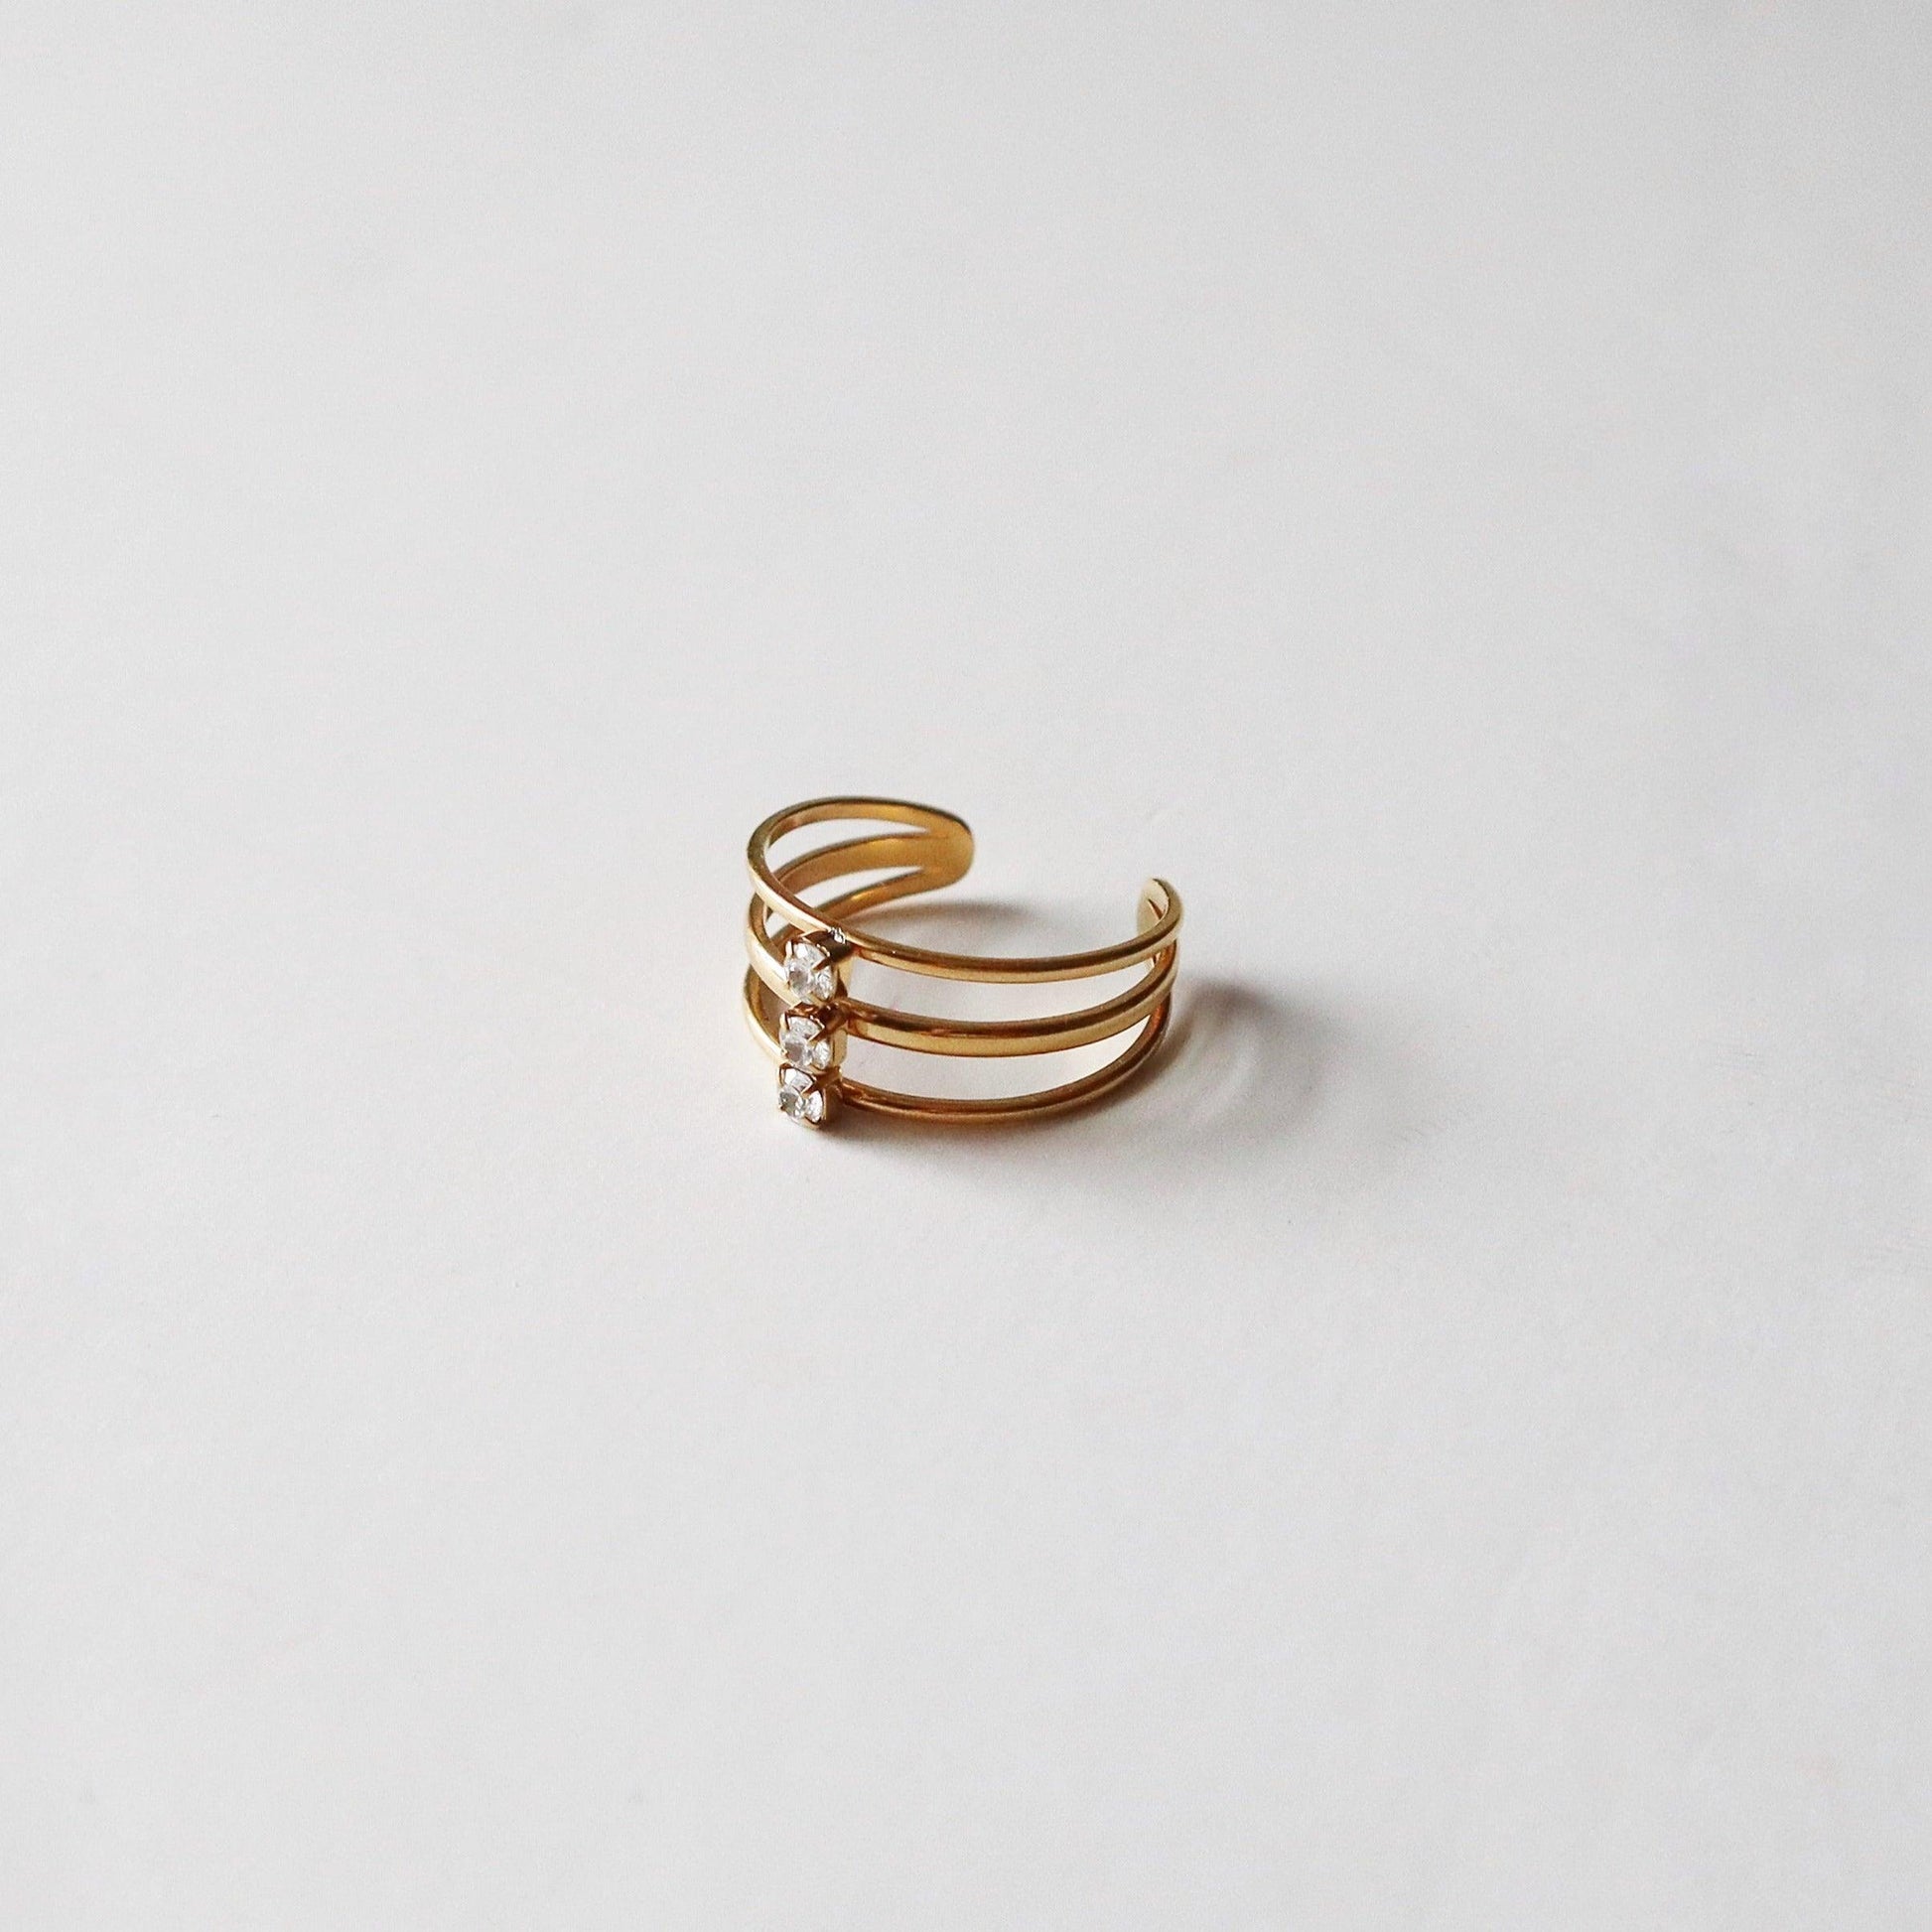 Noelle Ring | Adjustable Ring - JESSA JEWELRY | GOLD JEWELRY; dainty, affordable gold everyday jewelry. Tarnish free, water-resistant, hypoallergenic. Jewelry for everyday wear